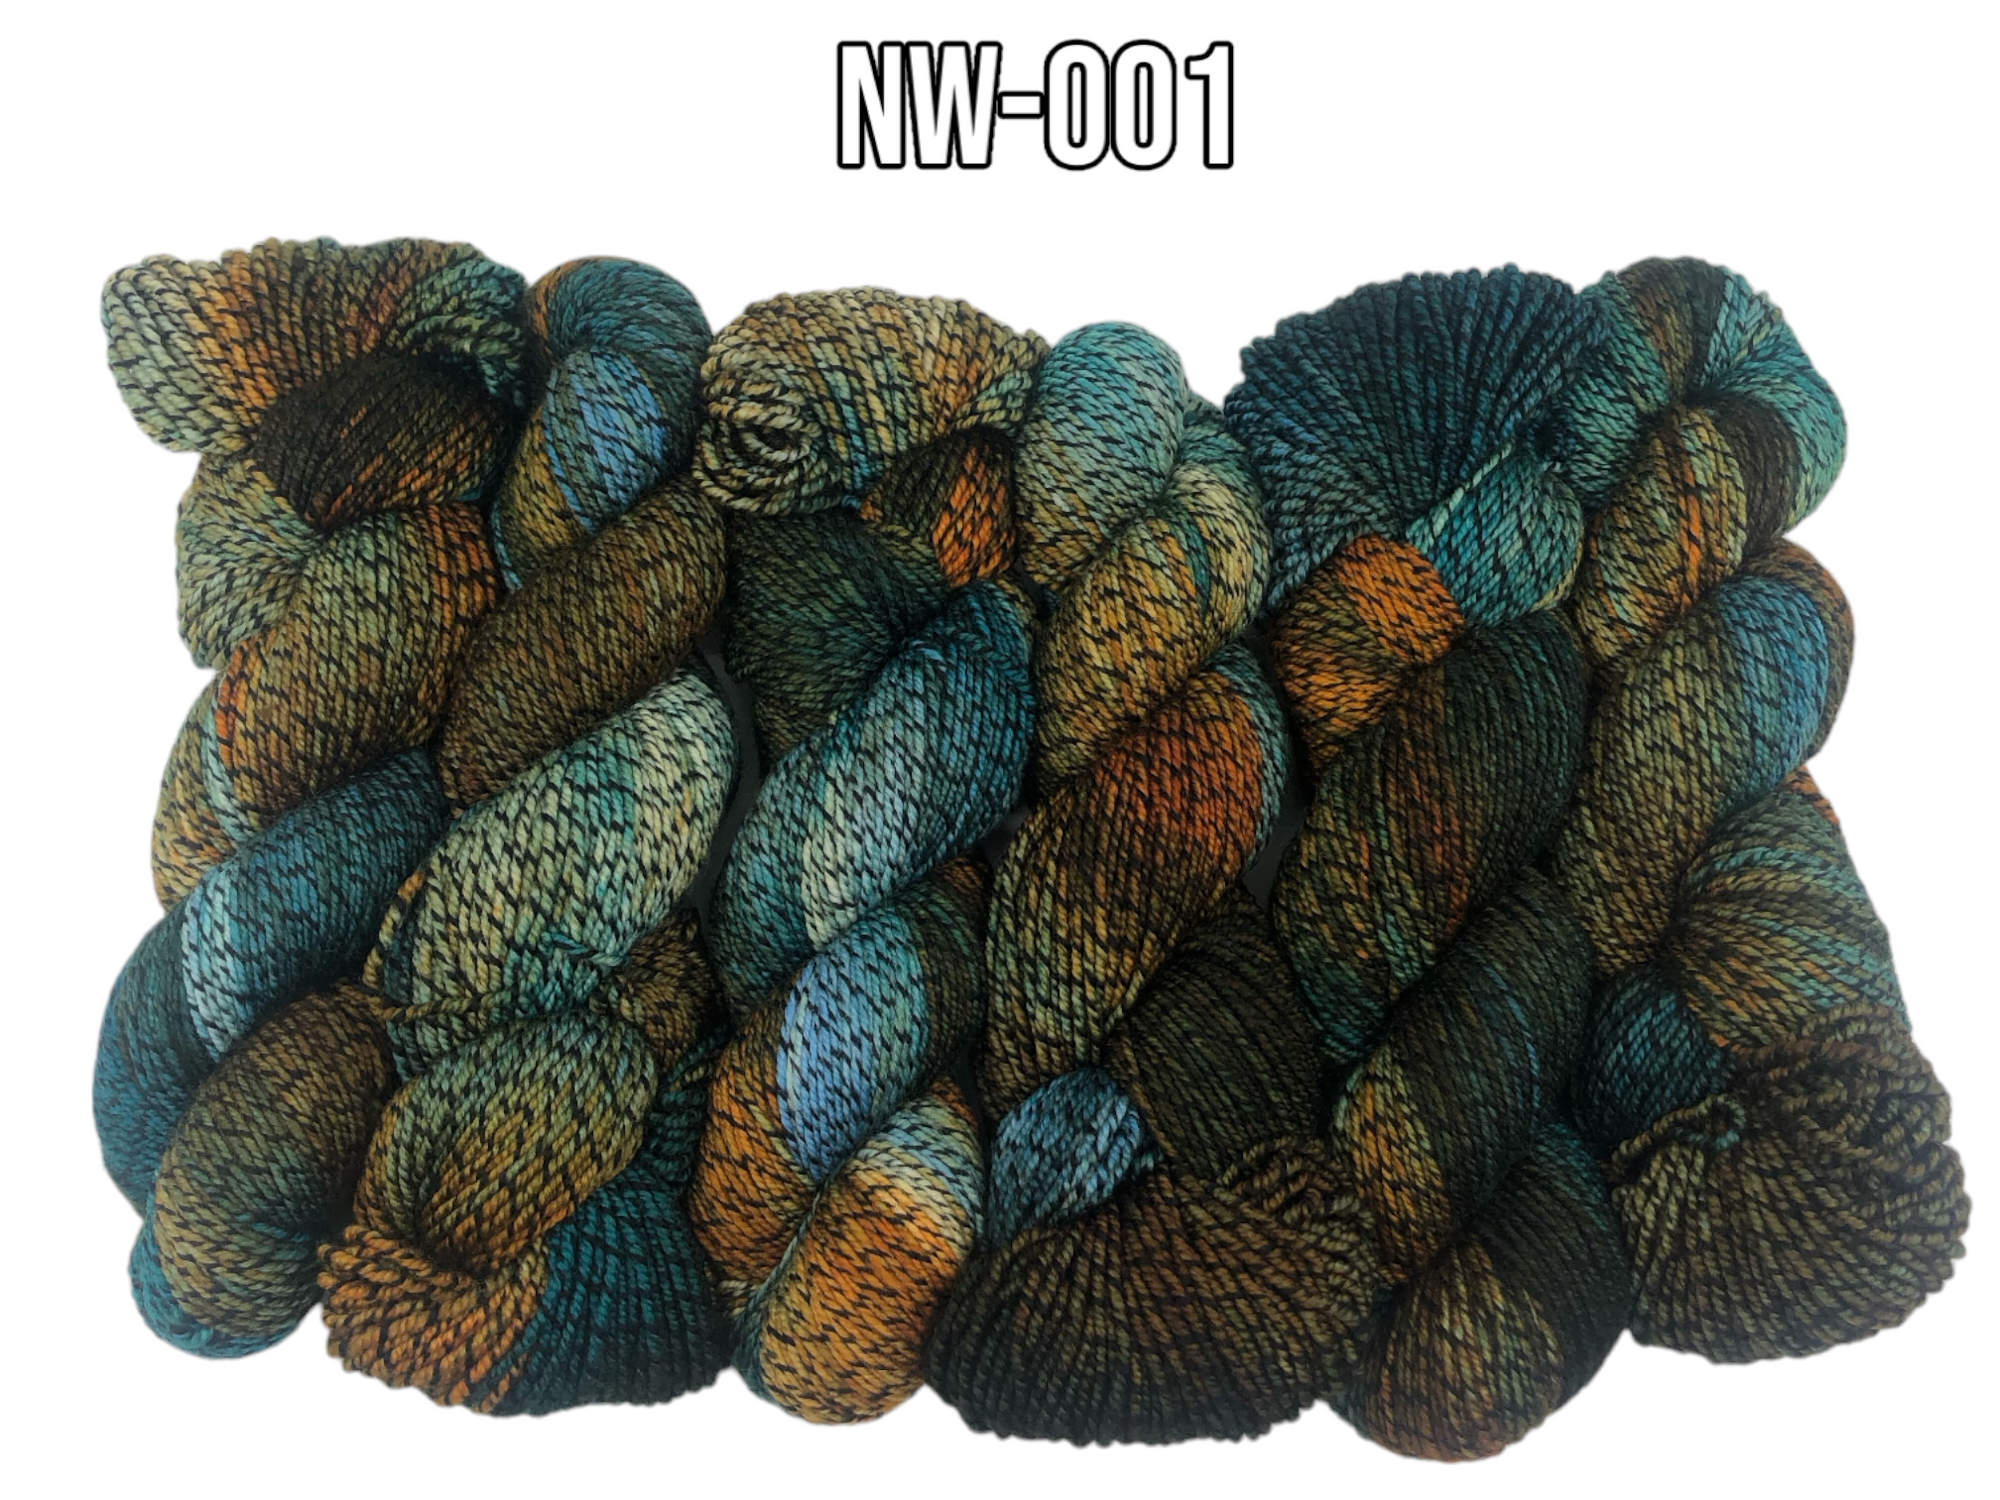 What Is Worsted Weight Yarn? - ZenYarnGarden.co